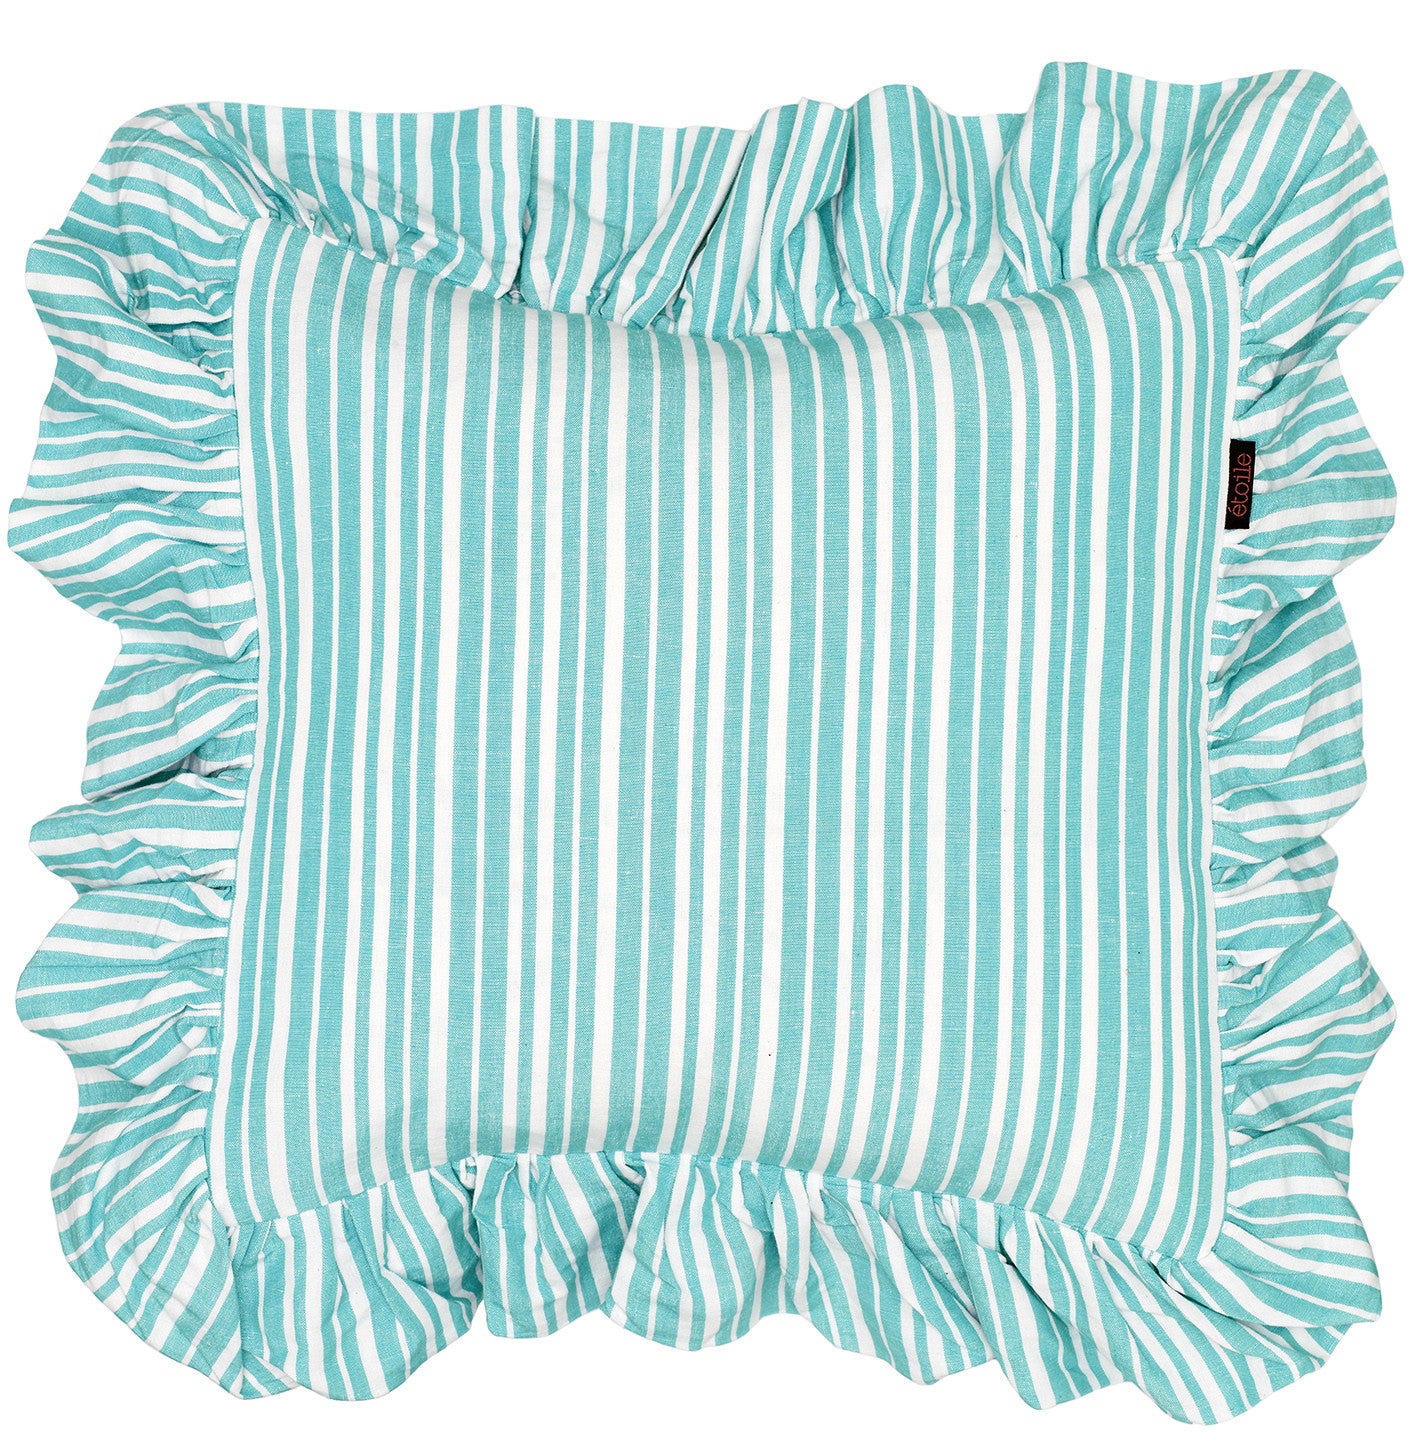 Palermo Ticking Stripe Ruffle Decorative Throw Pillow in Pacific Turquoise Blue 45x45cm 18x18"